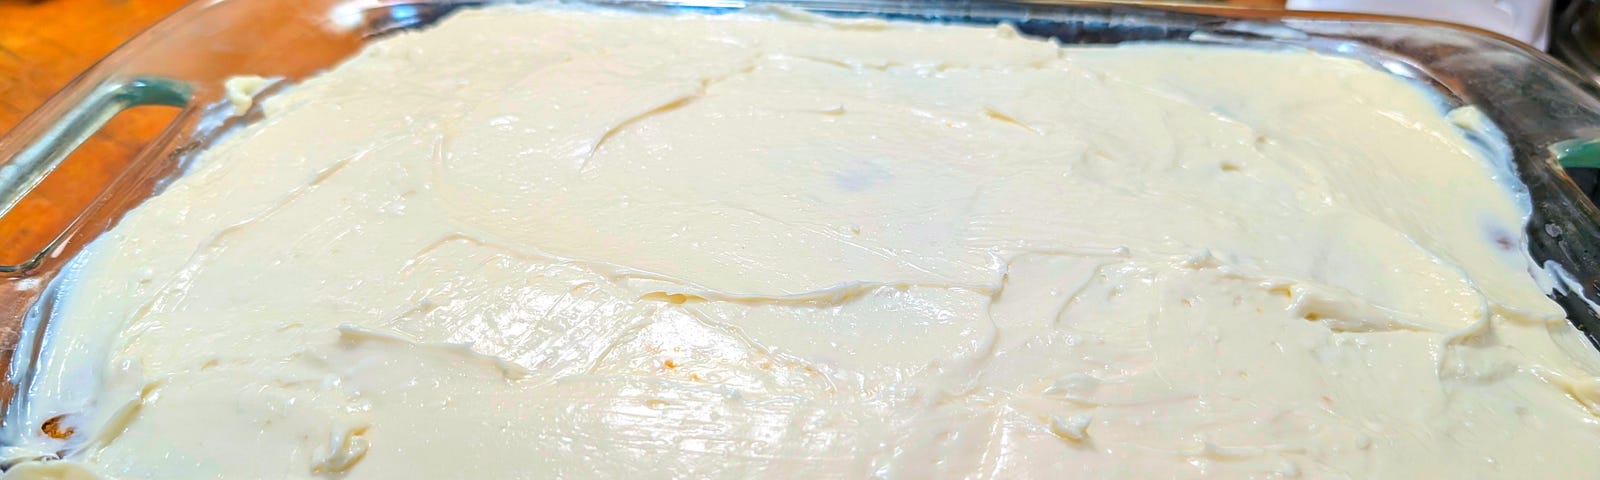 A glass baking dish is shown filled with a creamy white mixture, which appears to be either frosting or a dessert base not yet finished. The surface is uneven and suggests that the mixture has been spread manually with some kind of spatula.